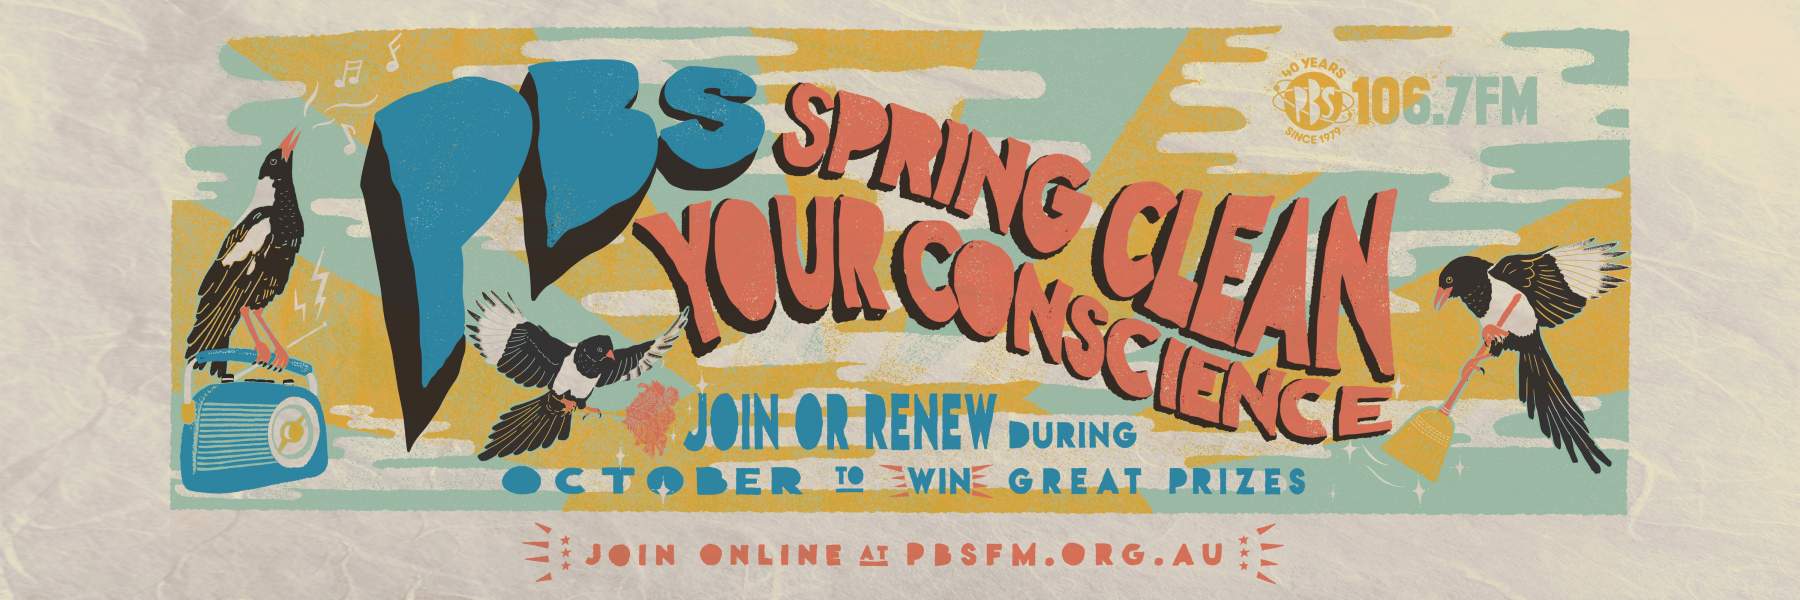 PBS - Spring Clean Your Conscience